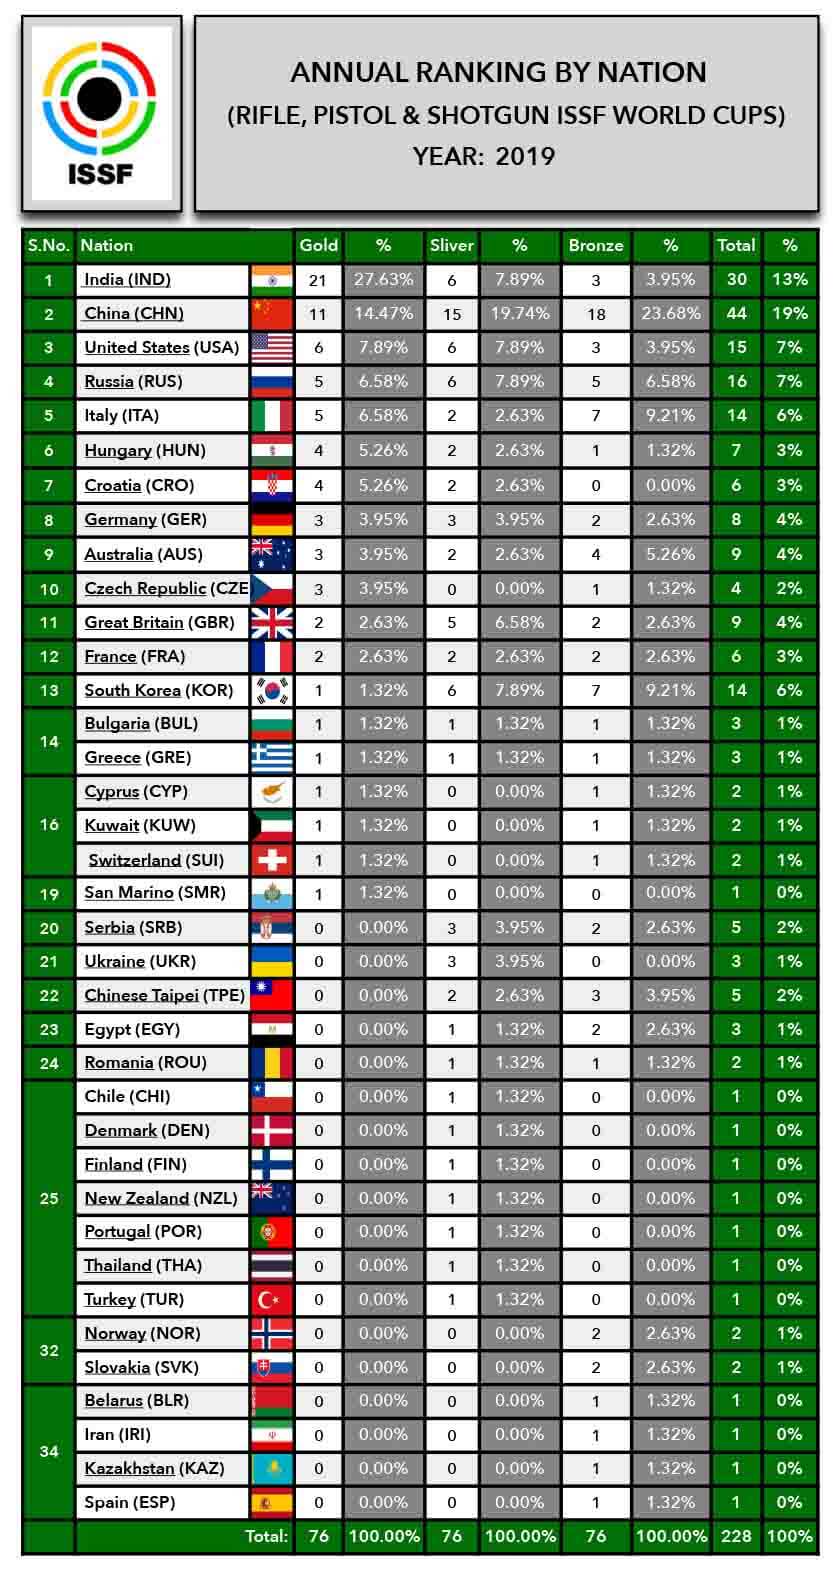 ISSF Annual Rankings 2019 by Nation